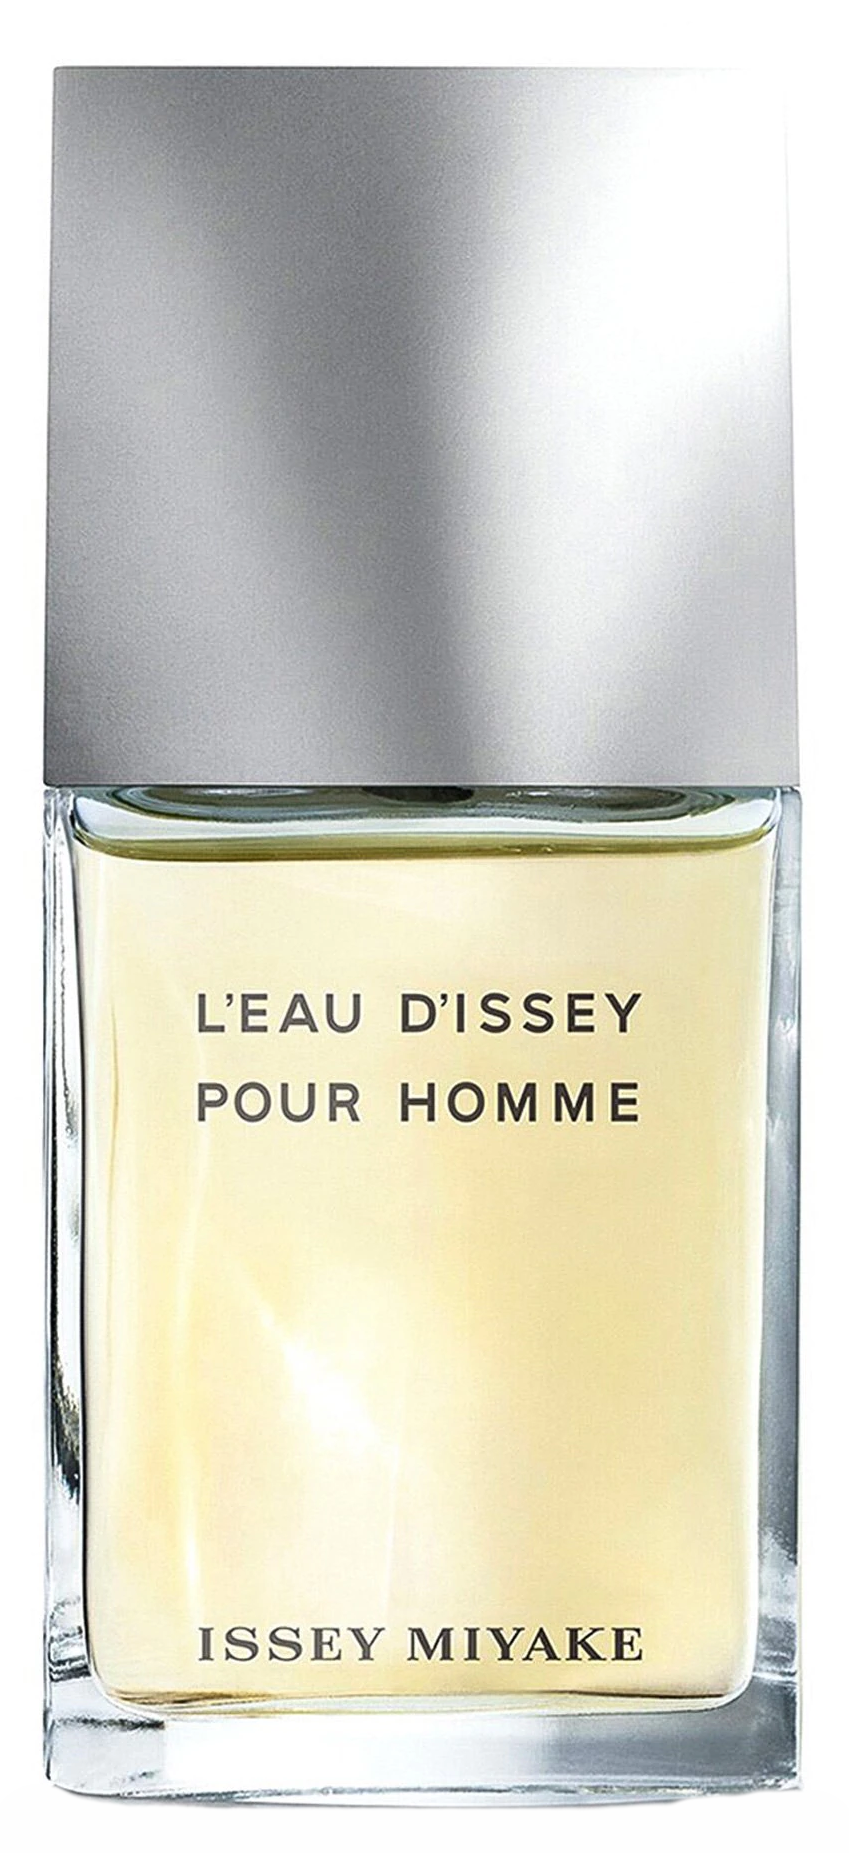 L'Eau d'Issey Pour Homme Fraiche Issey Miyake cologne - a new fragrance ...